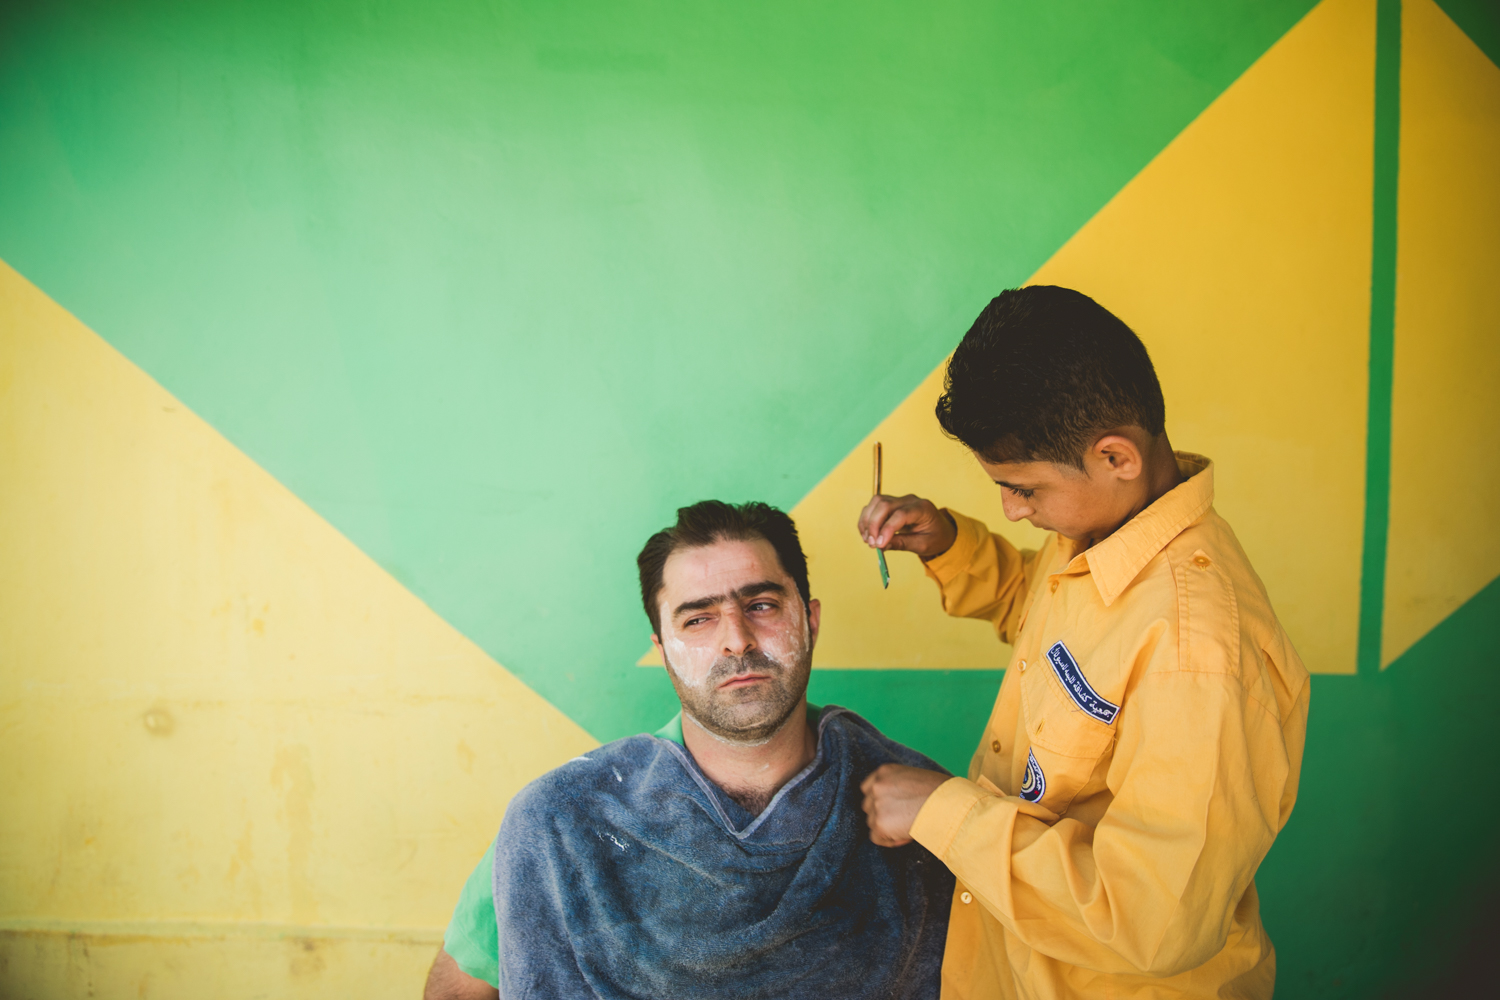  Yasar Taha, a 15-year-old Syrian refugee, works illegally as a barber as well as in a local restaurant while attempting to go to school. If he stops working his family might lose the tent they live in, as they rely on his income along with his fathe